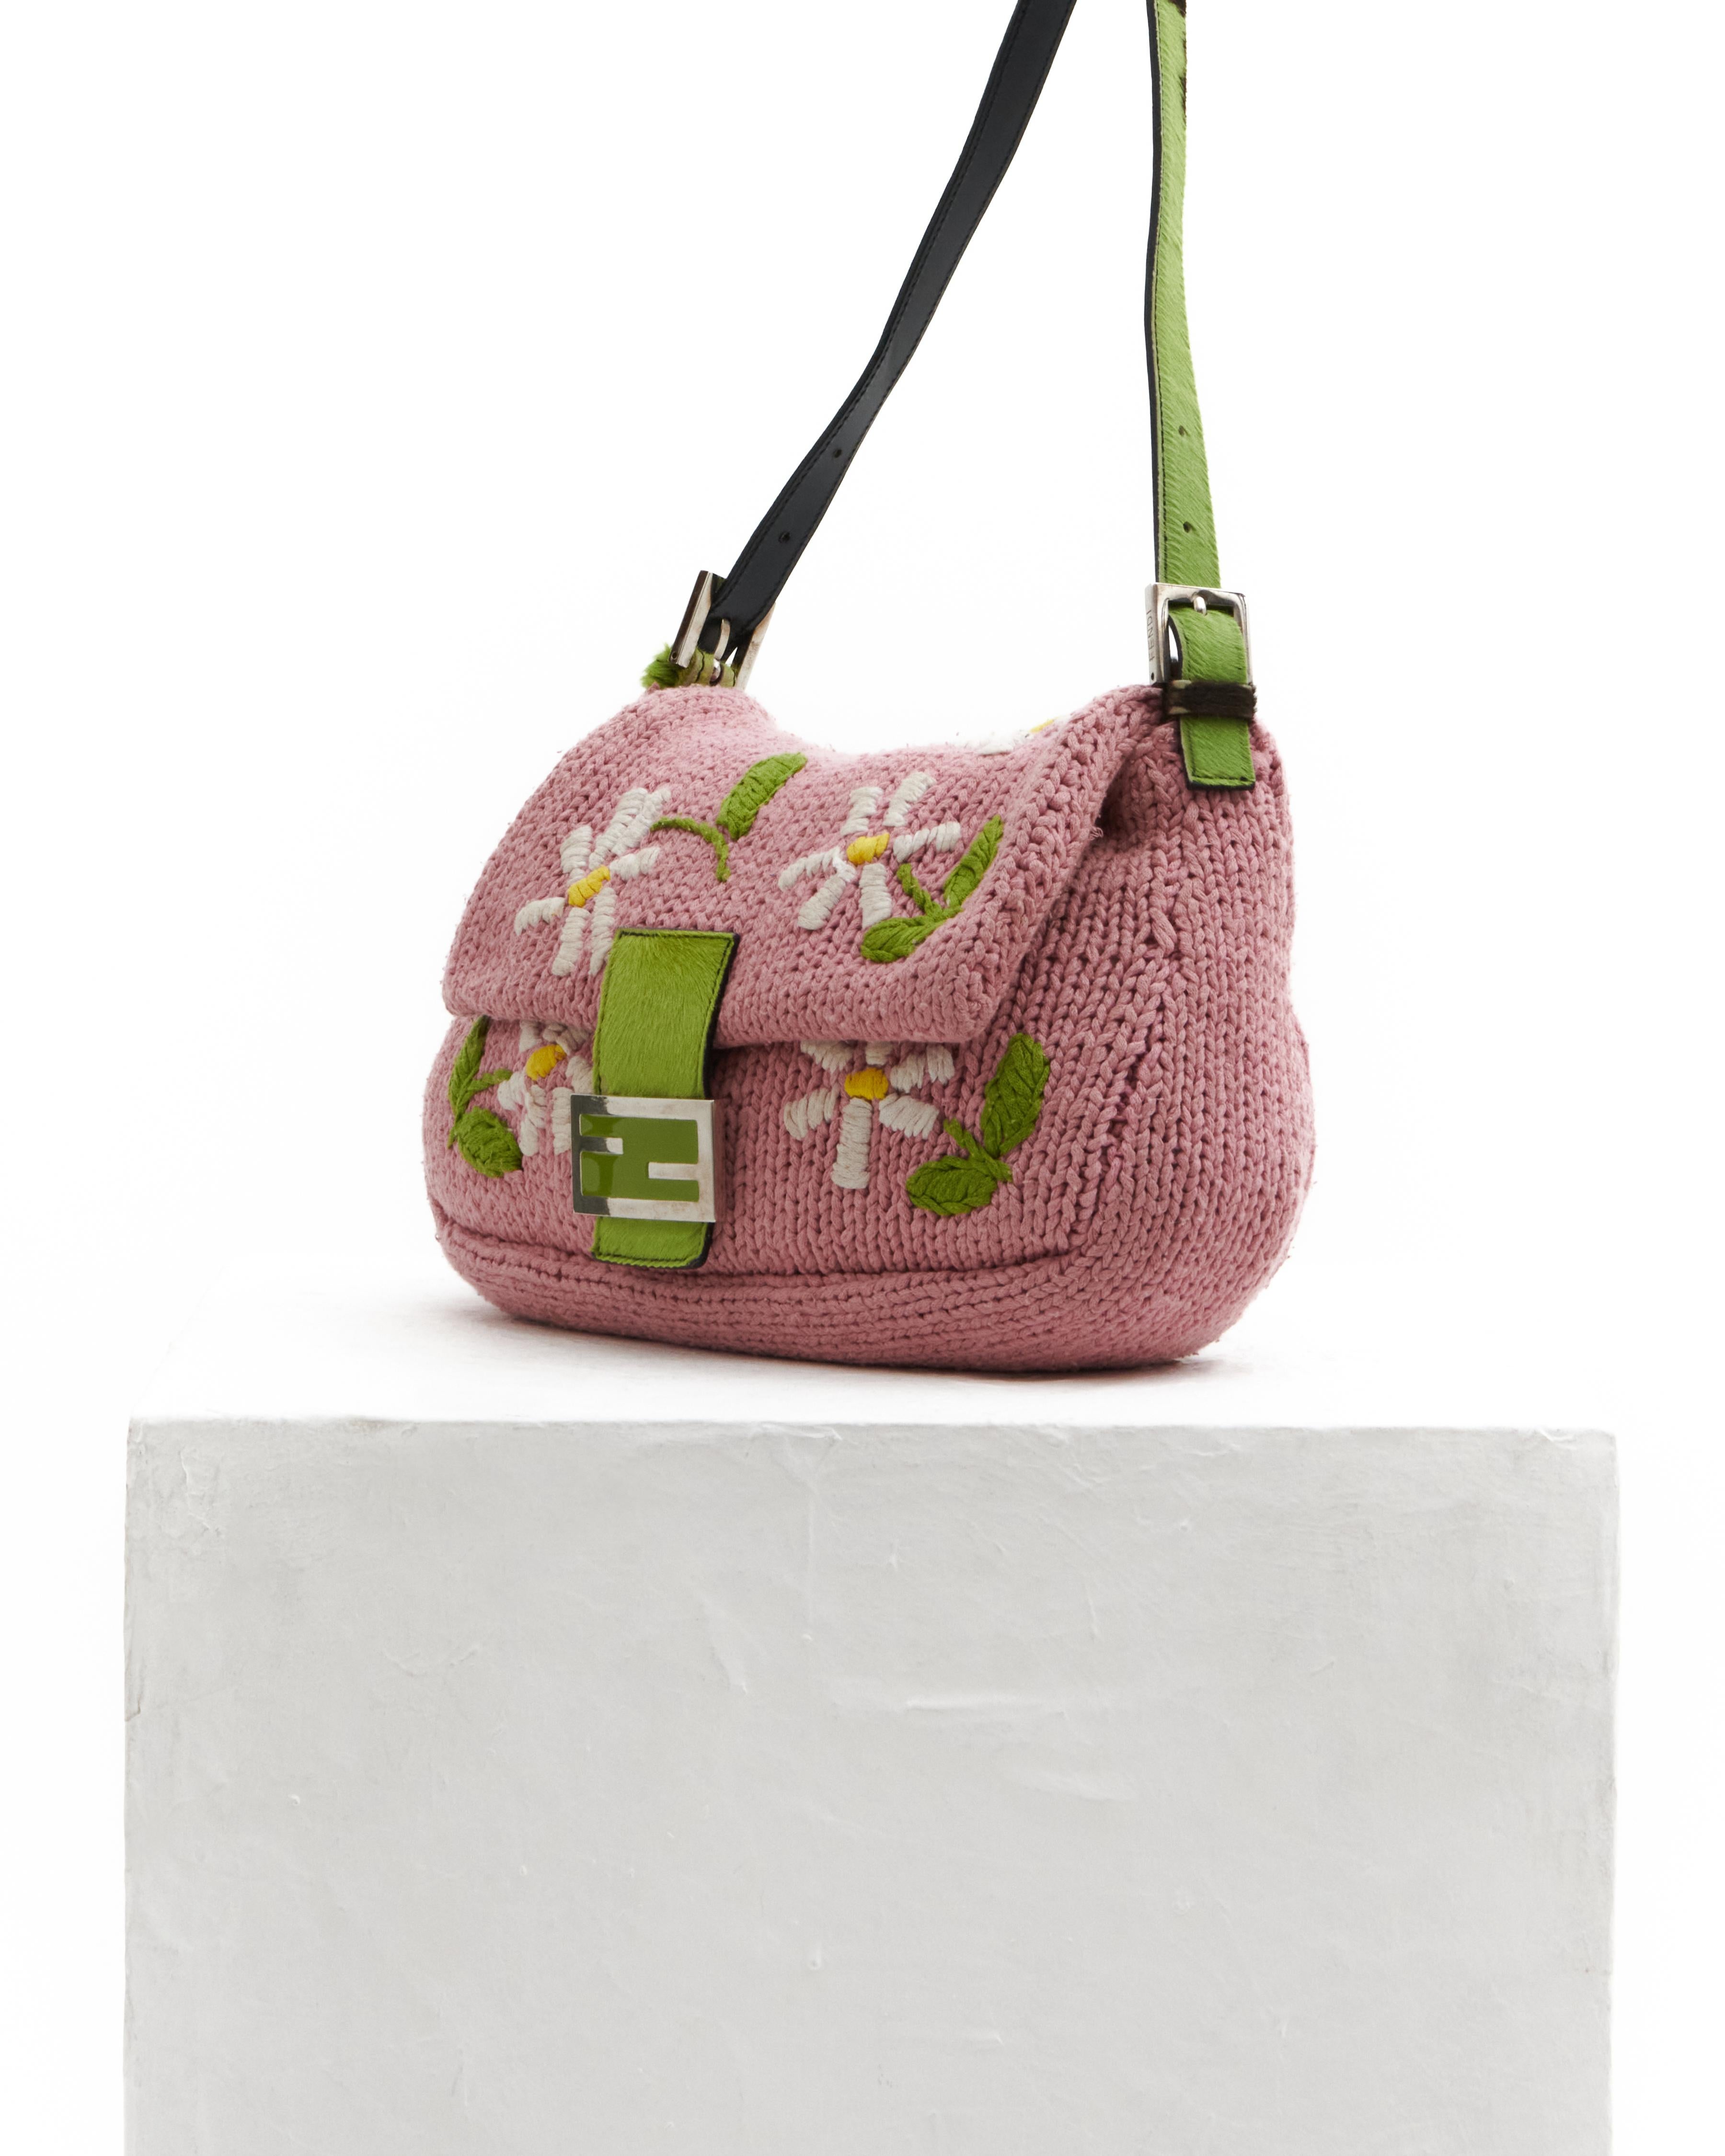 - Designed by Karl Lagerfeld 
- Sold by Skof.Archive
- From the 2000 Collection
- Pink knit floral embroidered cotton mama baguette
- Limited edition
- Silver-Tone Hardware
- Ponyhair Trim
- Single Adjustable Shoulder Strap
- Satin Lining & Single